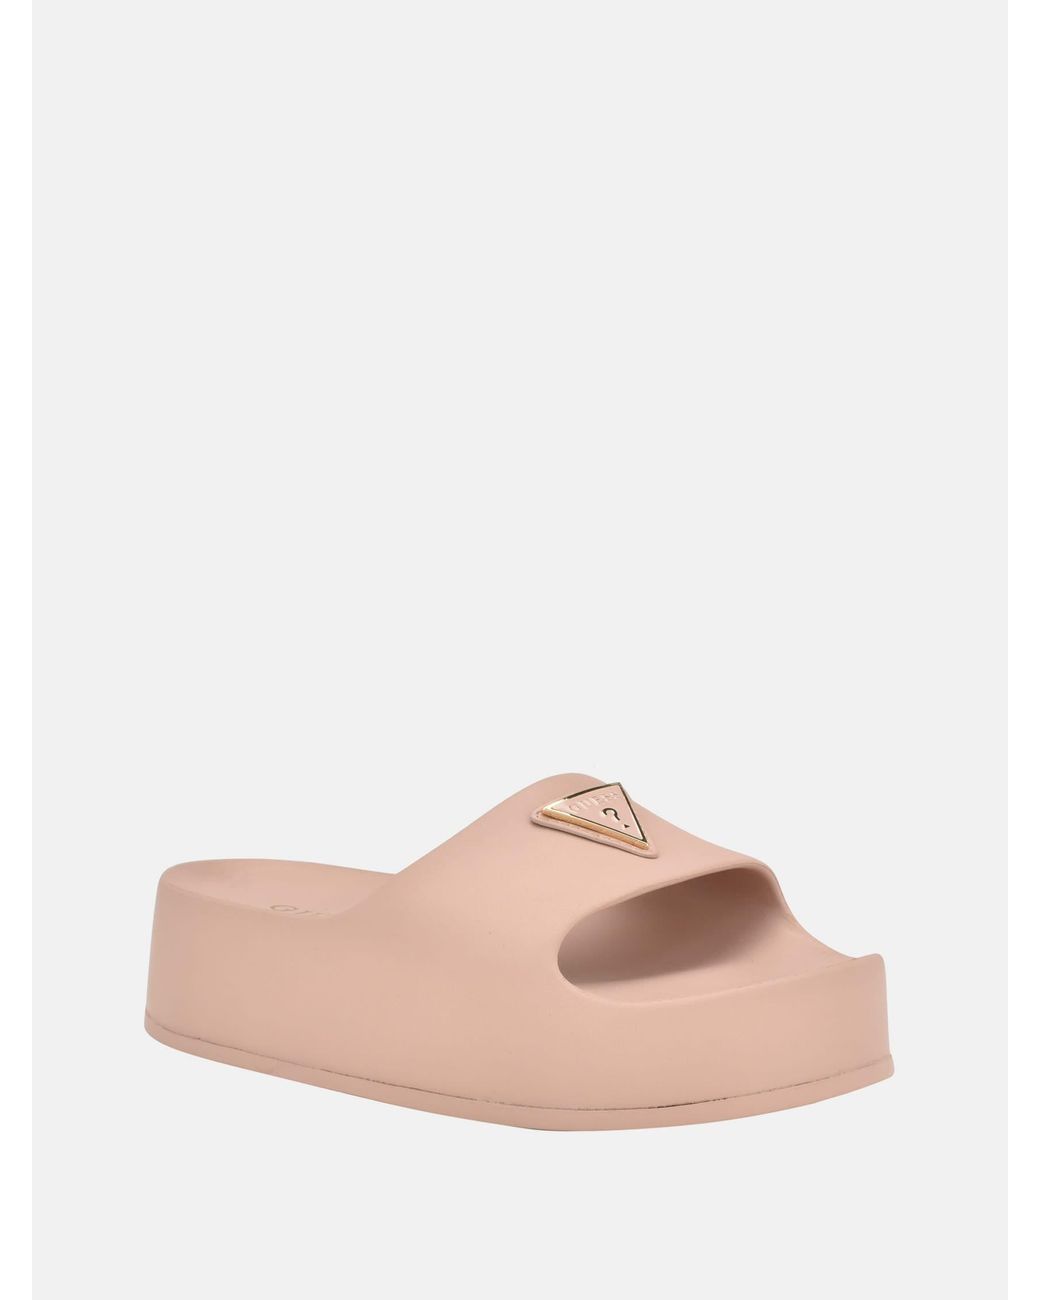 Guess Factory Plats Platform Pool Slides in Pink | Lyst